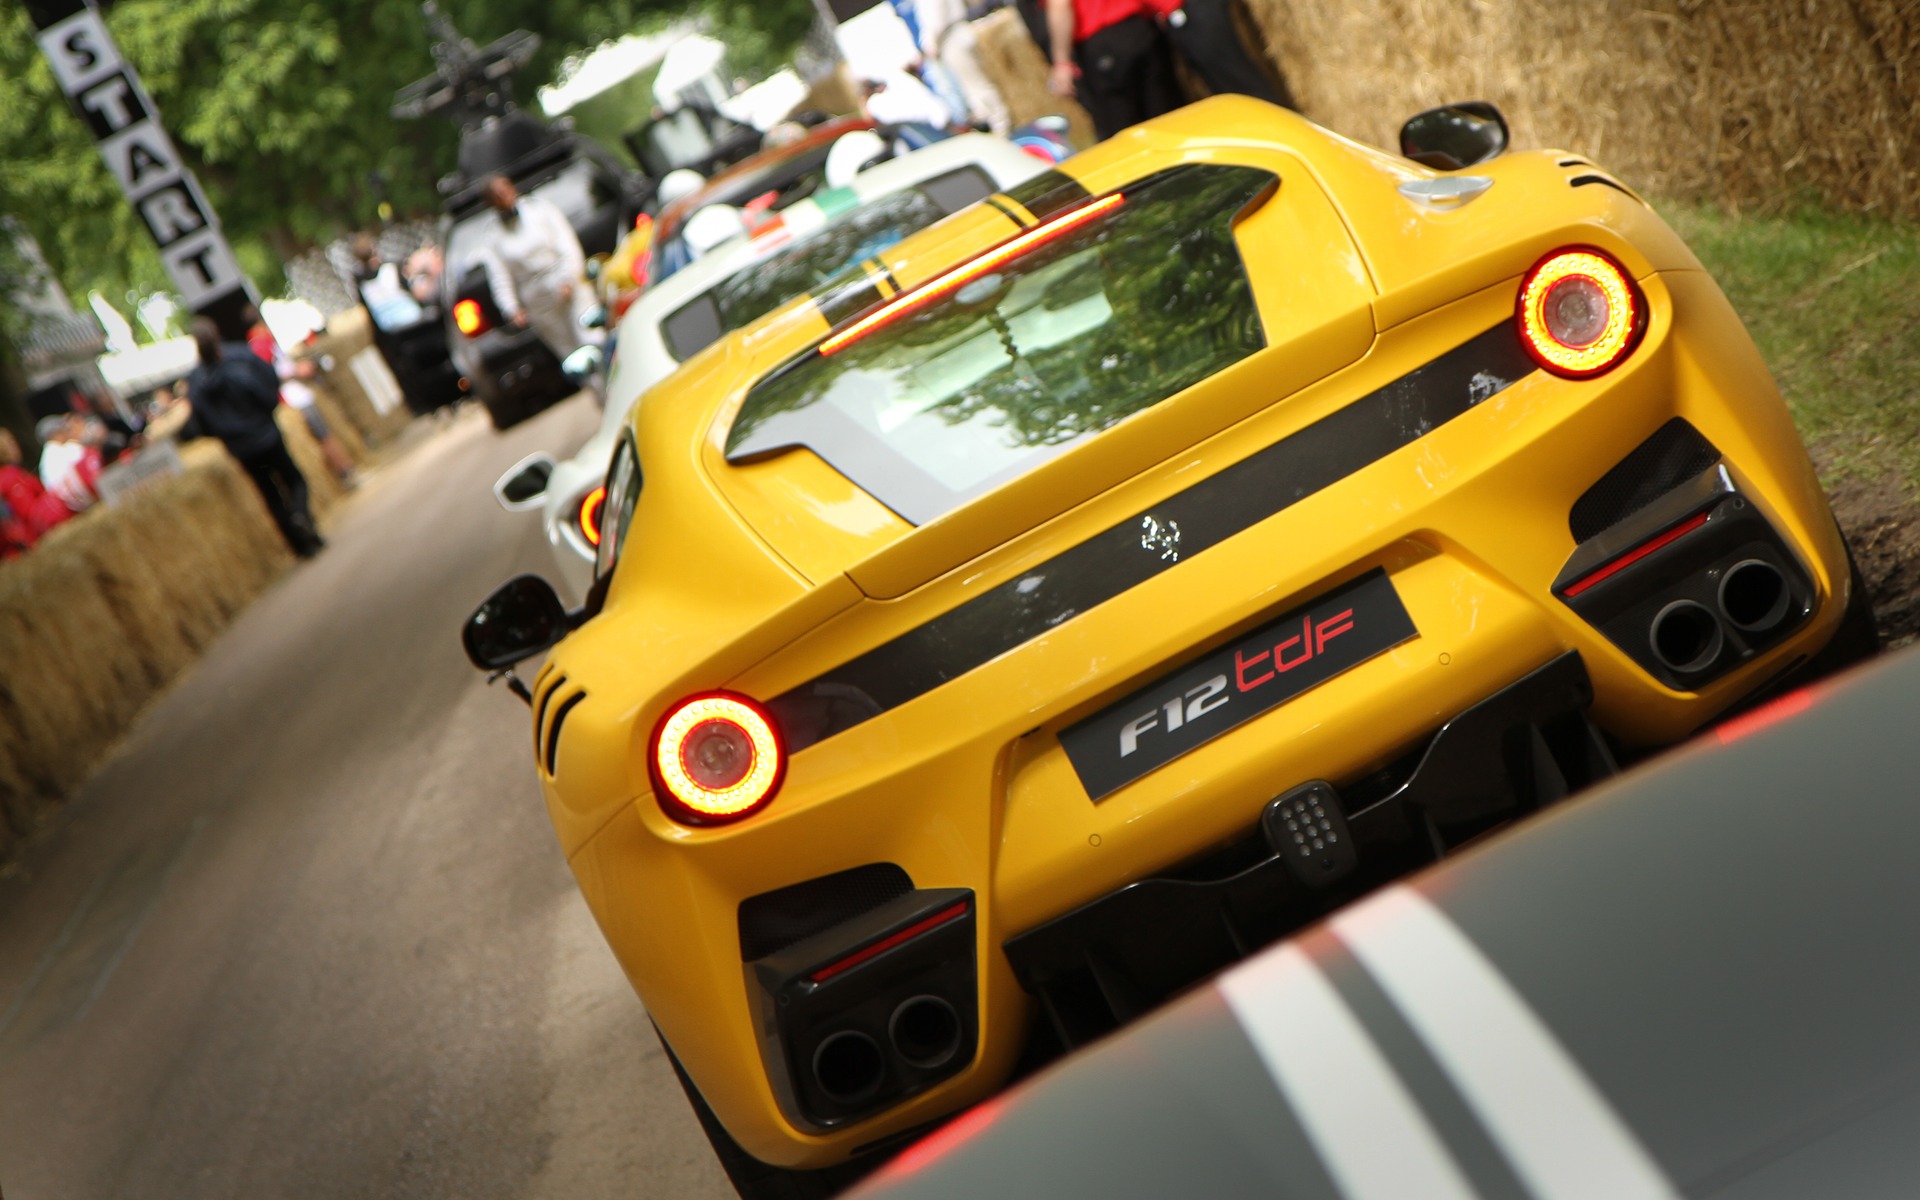 Ferrari F12 tdf in action at the Festival of Speed 2016